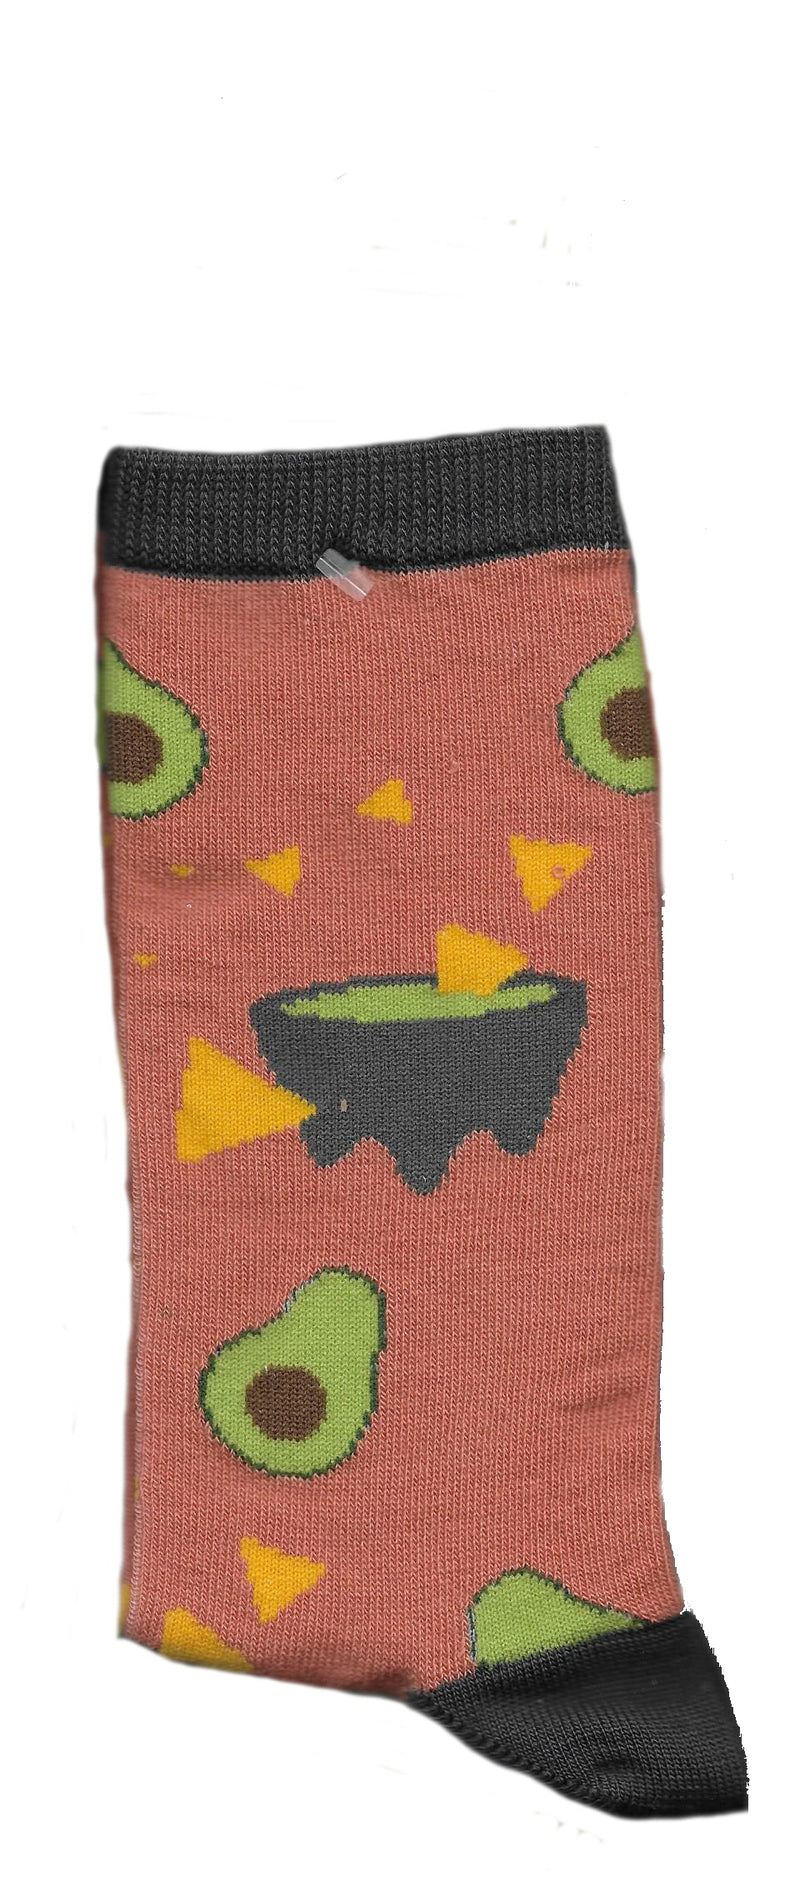 This Avocado Sock is Rust with Gunmetal Cuffs, Heels and Toes as well as the Salsa Bowl. Avocacos and Chips are all over.